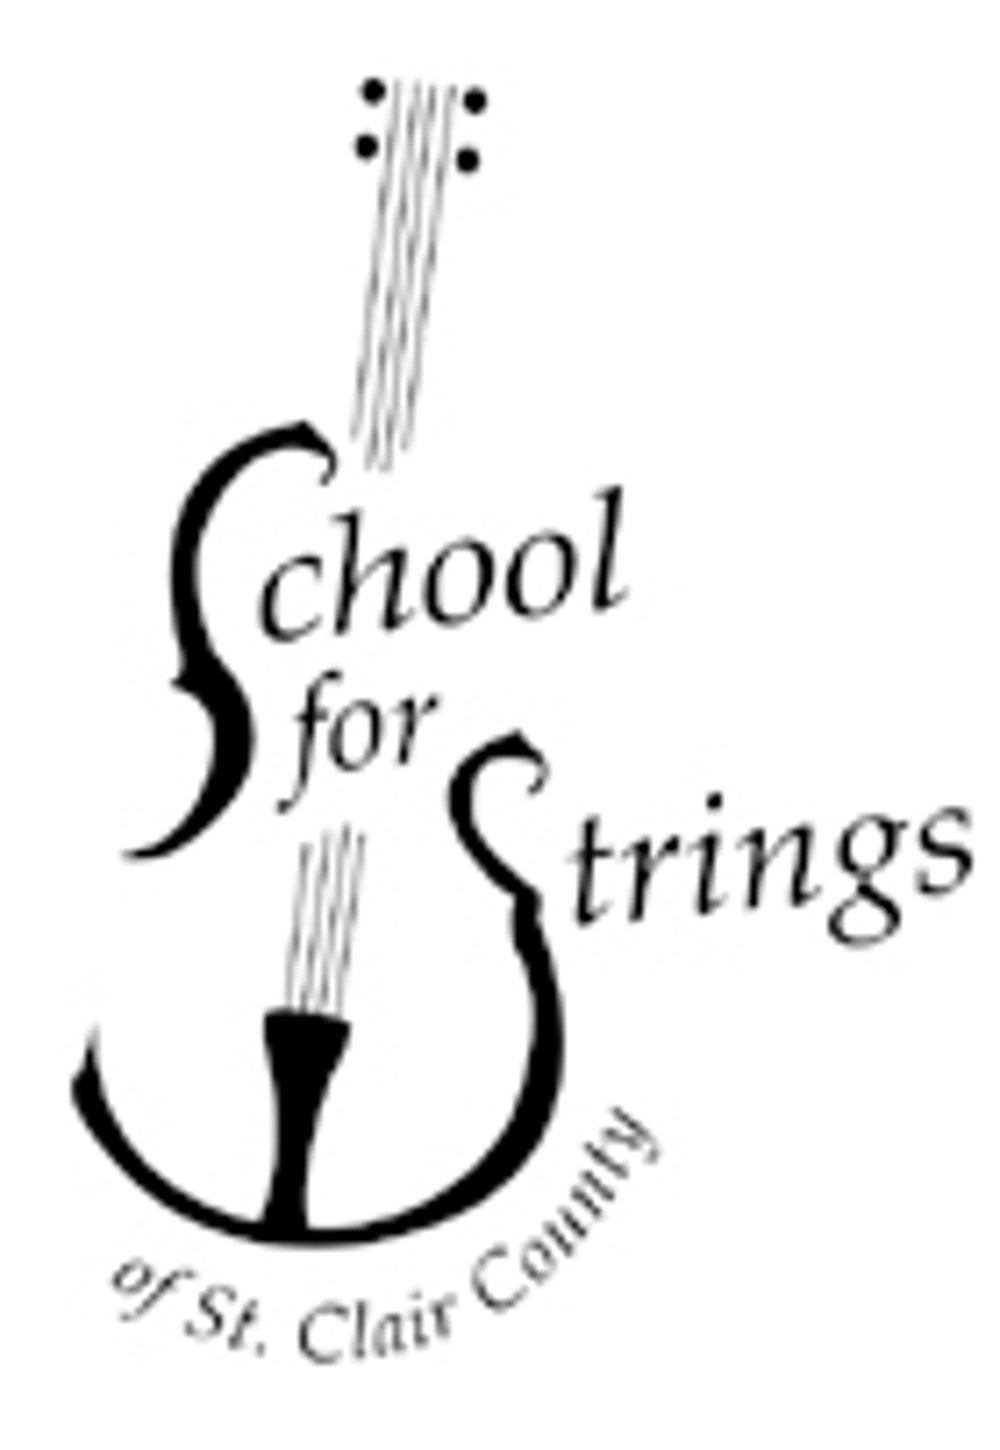 School for Strings of St. Clair County 